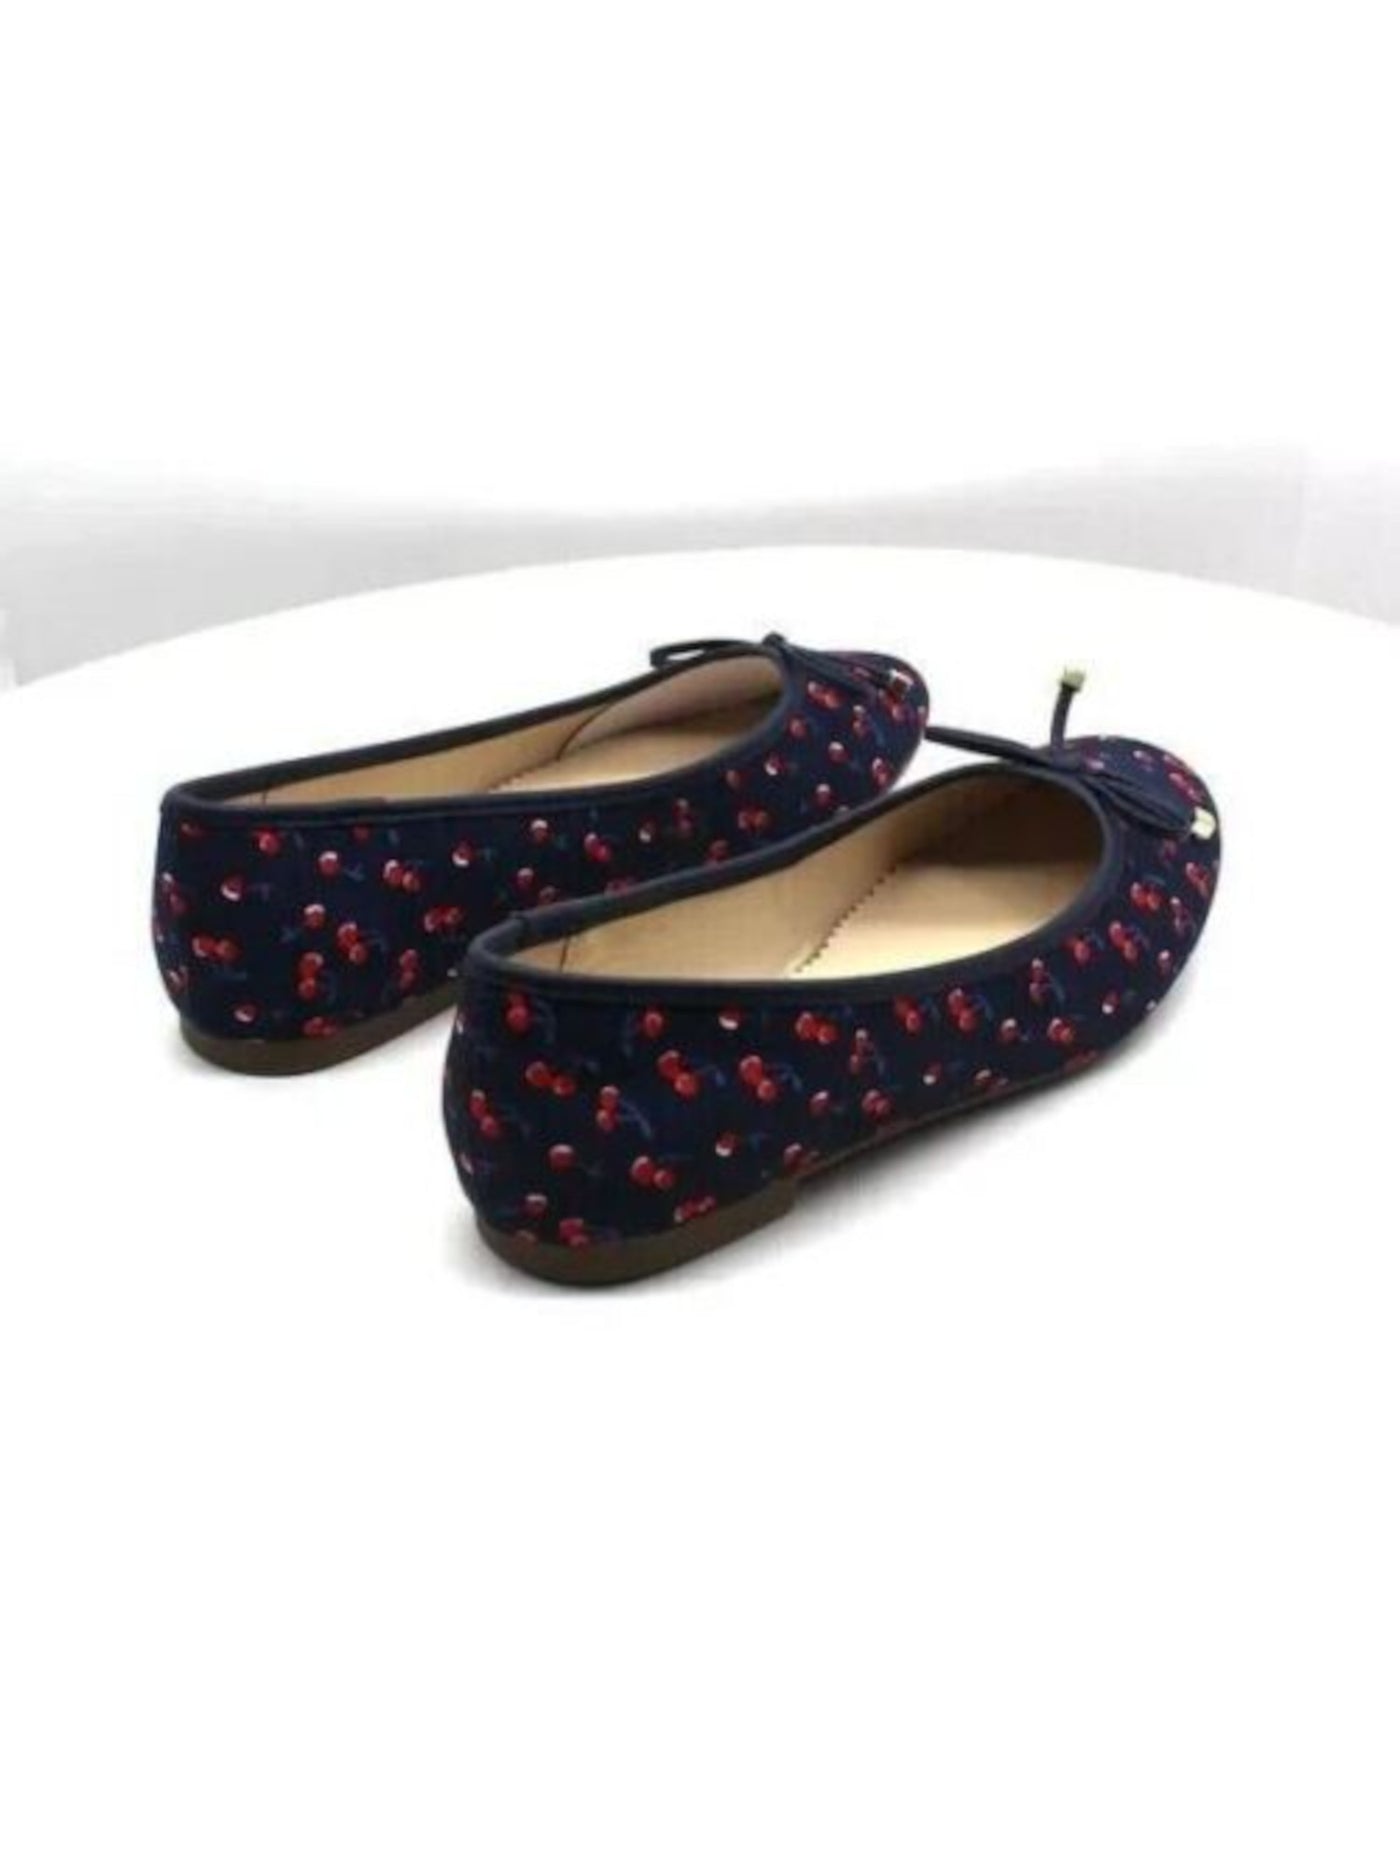 CHARTER CLUB Womens Navy Cherries Bow Accent Comfort Kaii Round Toe Slip On Ballet Flats 9 M